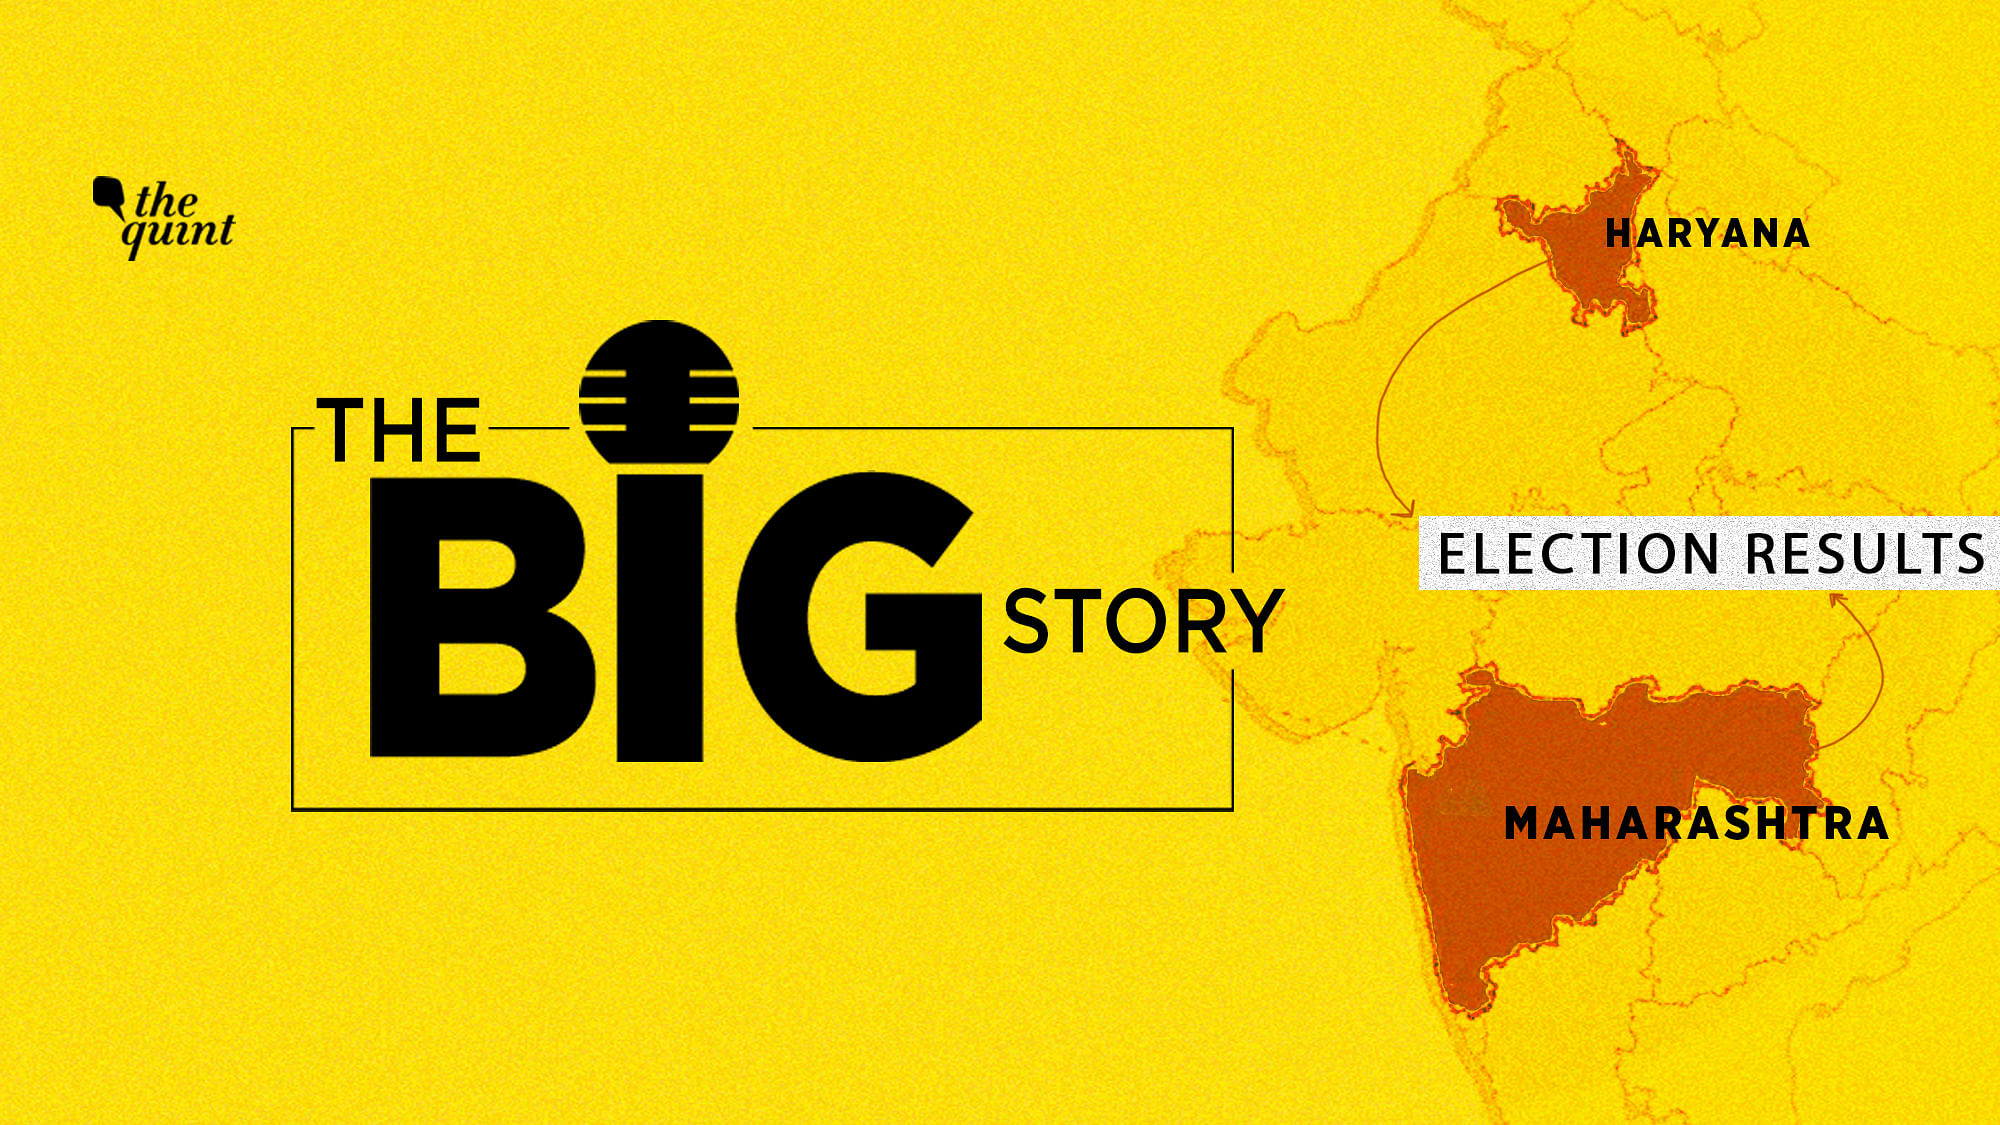 The results of the elections for Maharashtra and Haryana state Assemblies were declared on 24 October.